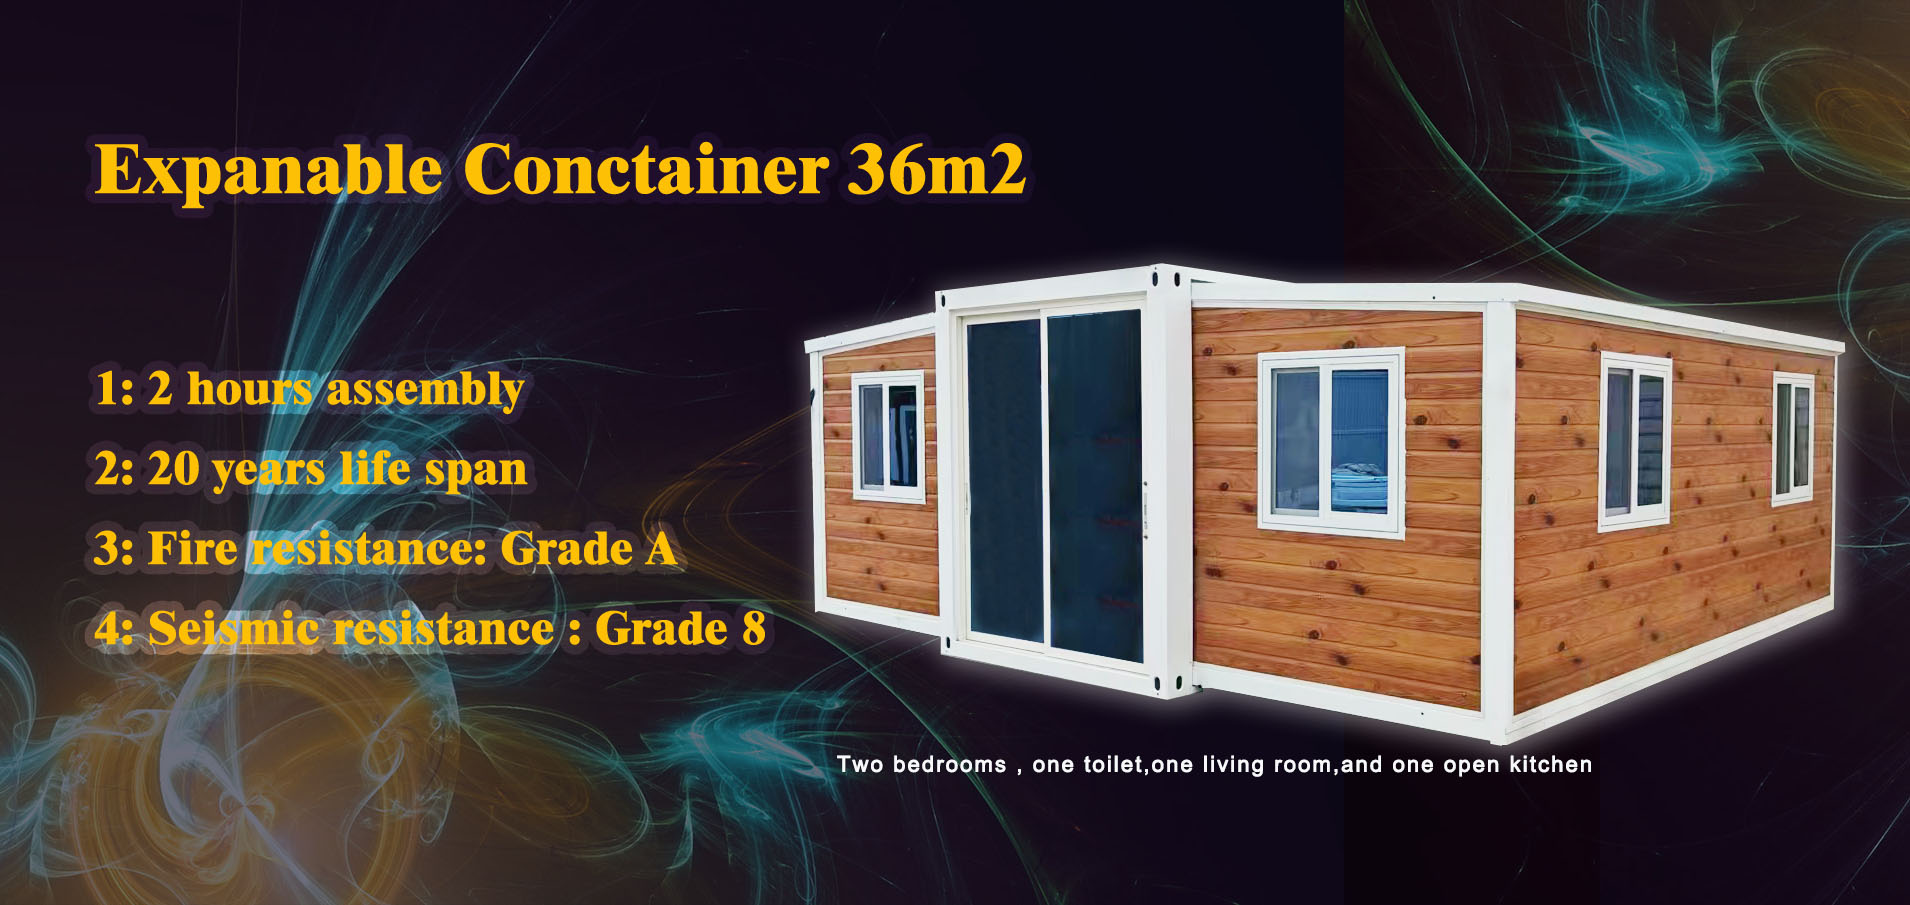 Prefab Expandable Container Homes